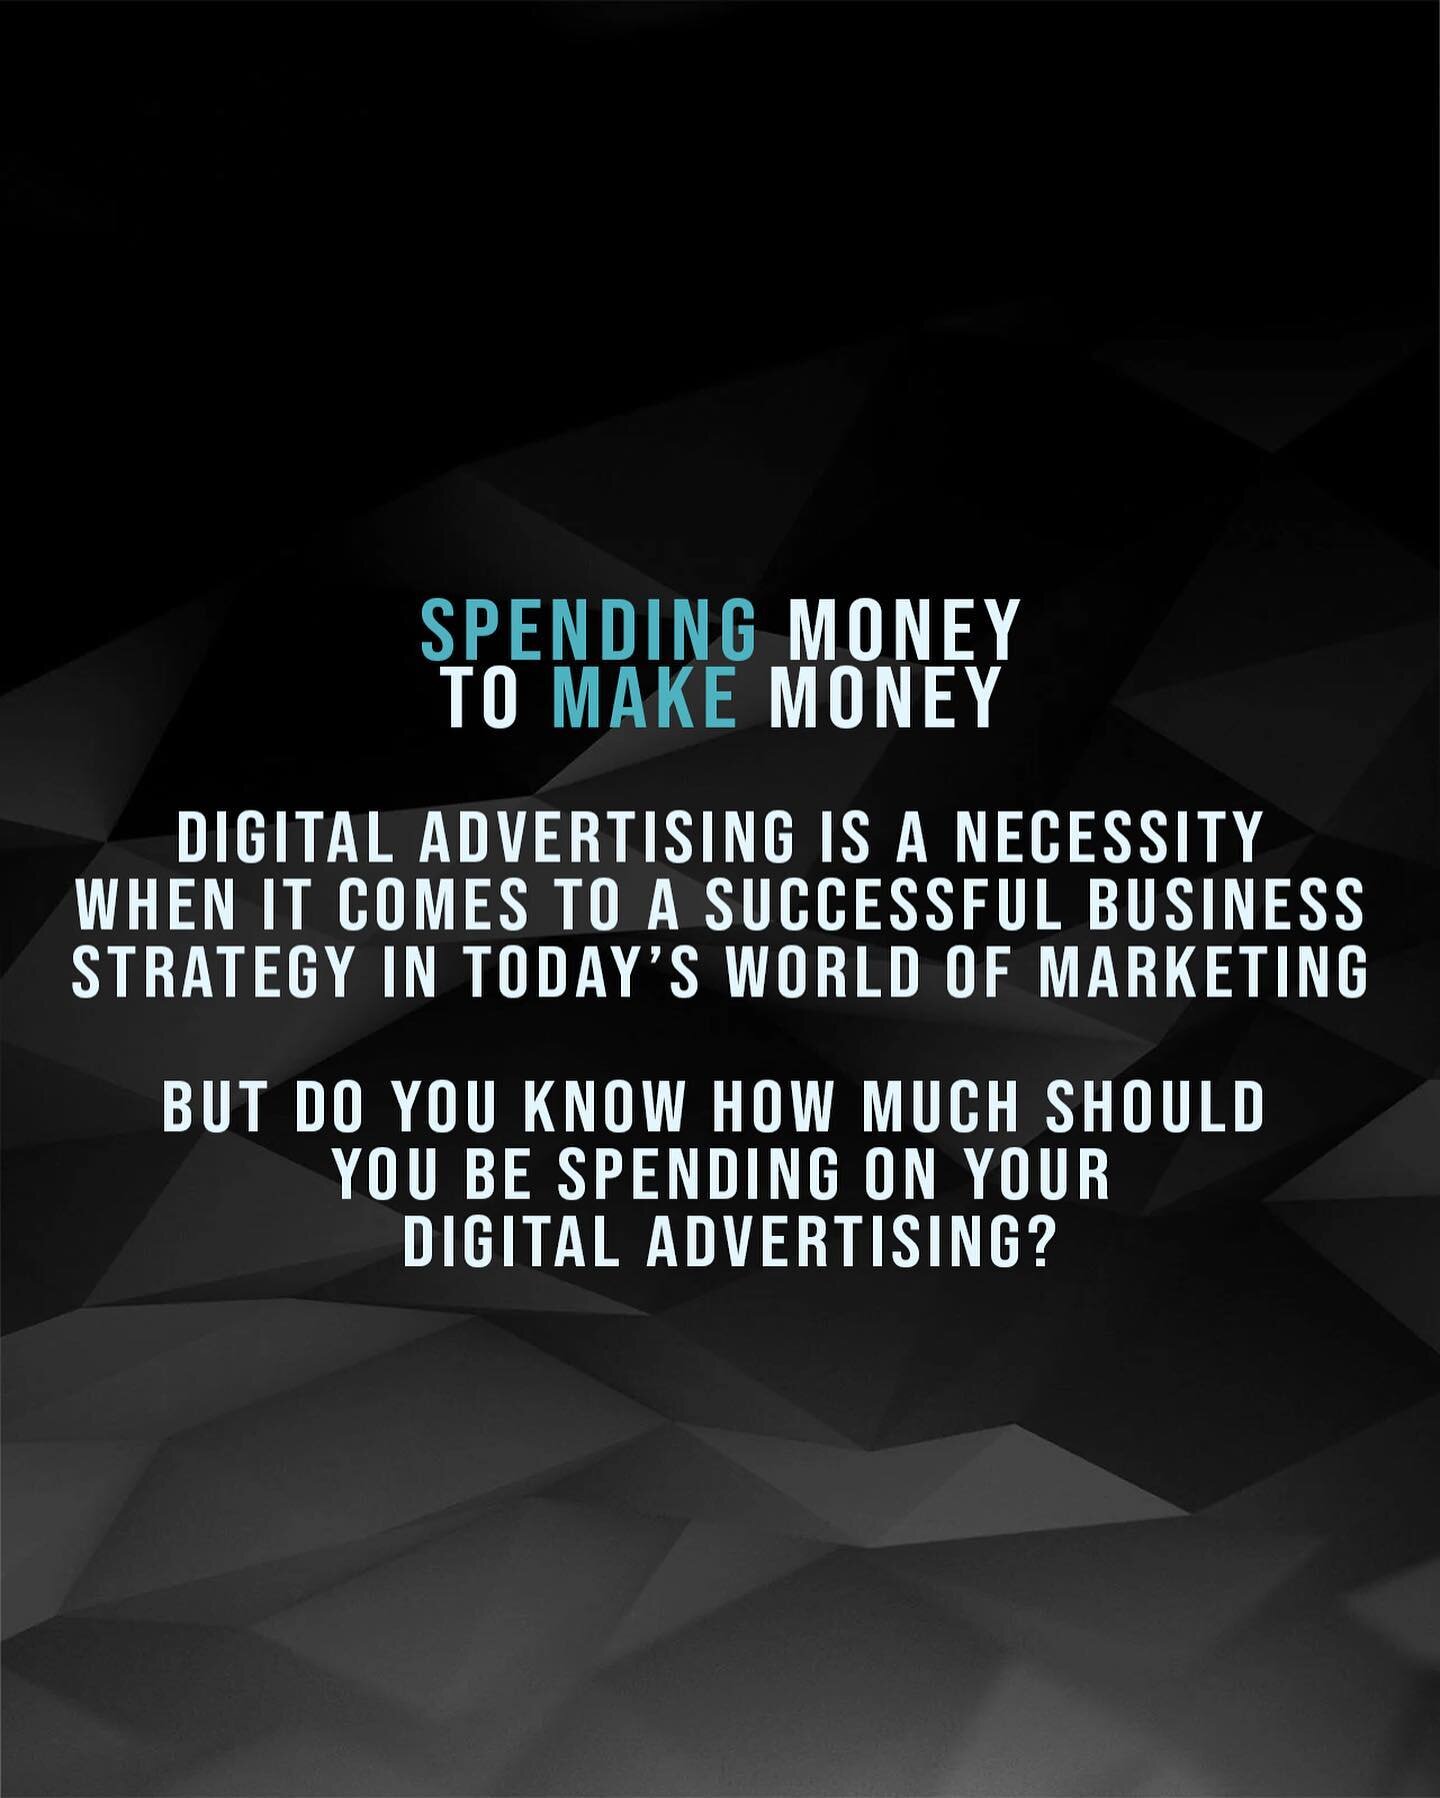 Digital advertising is a great way to reach potential customers and grow your business, but it's important to know how much to spend. The amount you should invest in digital advertising depends on factors such as your industry, target audience, and b